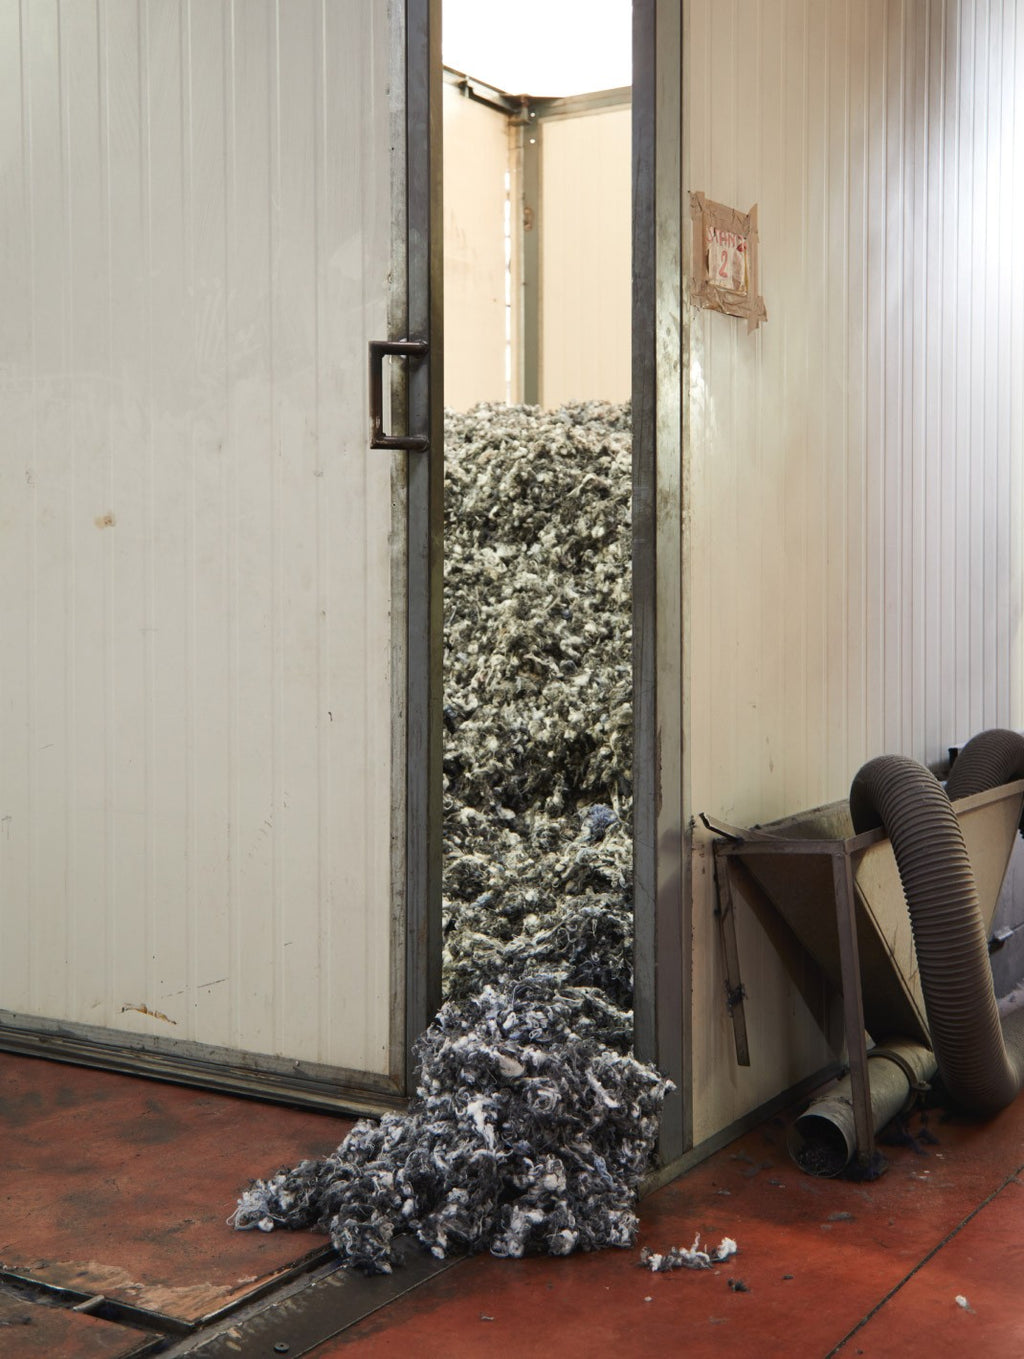 Open door with a pile of shredded material spilling out onto the floor.